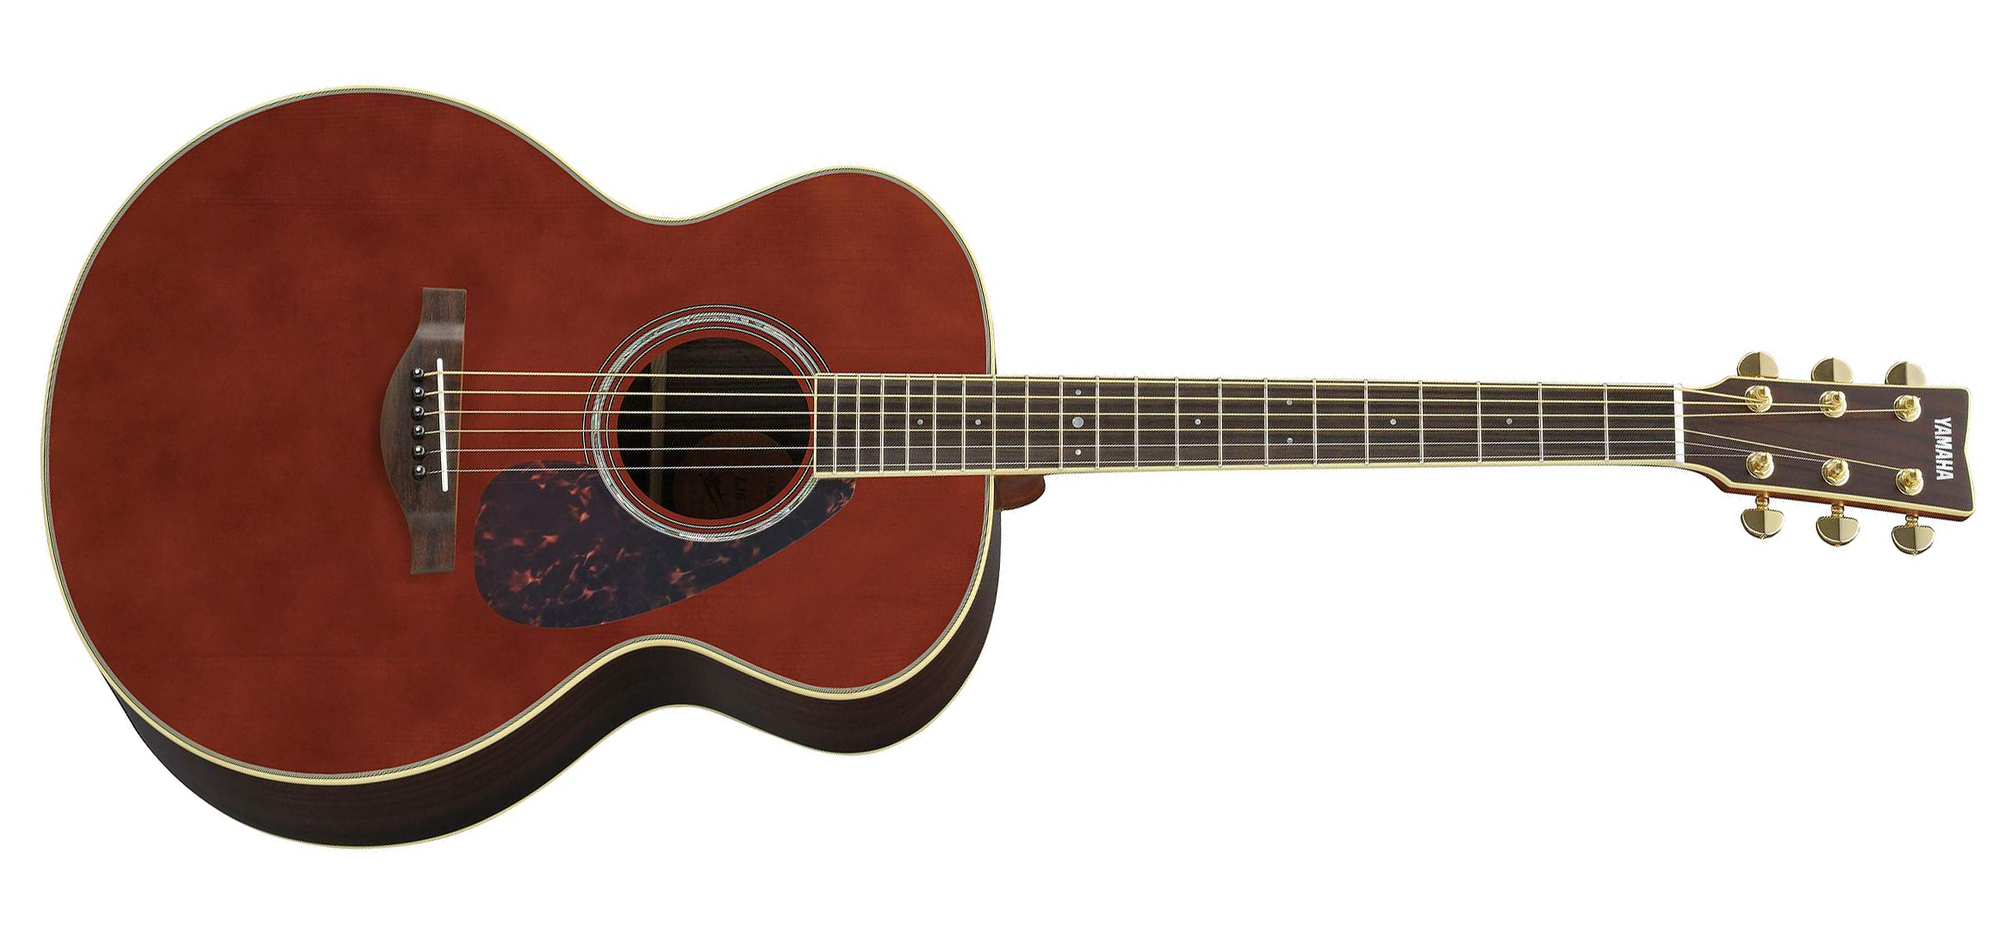 Yamaha LJ6ARE DT 6-String RH LJ6ARE Acoustic-Electric Guitar in Dark Tinted with Case